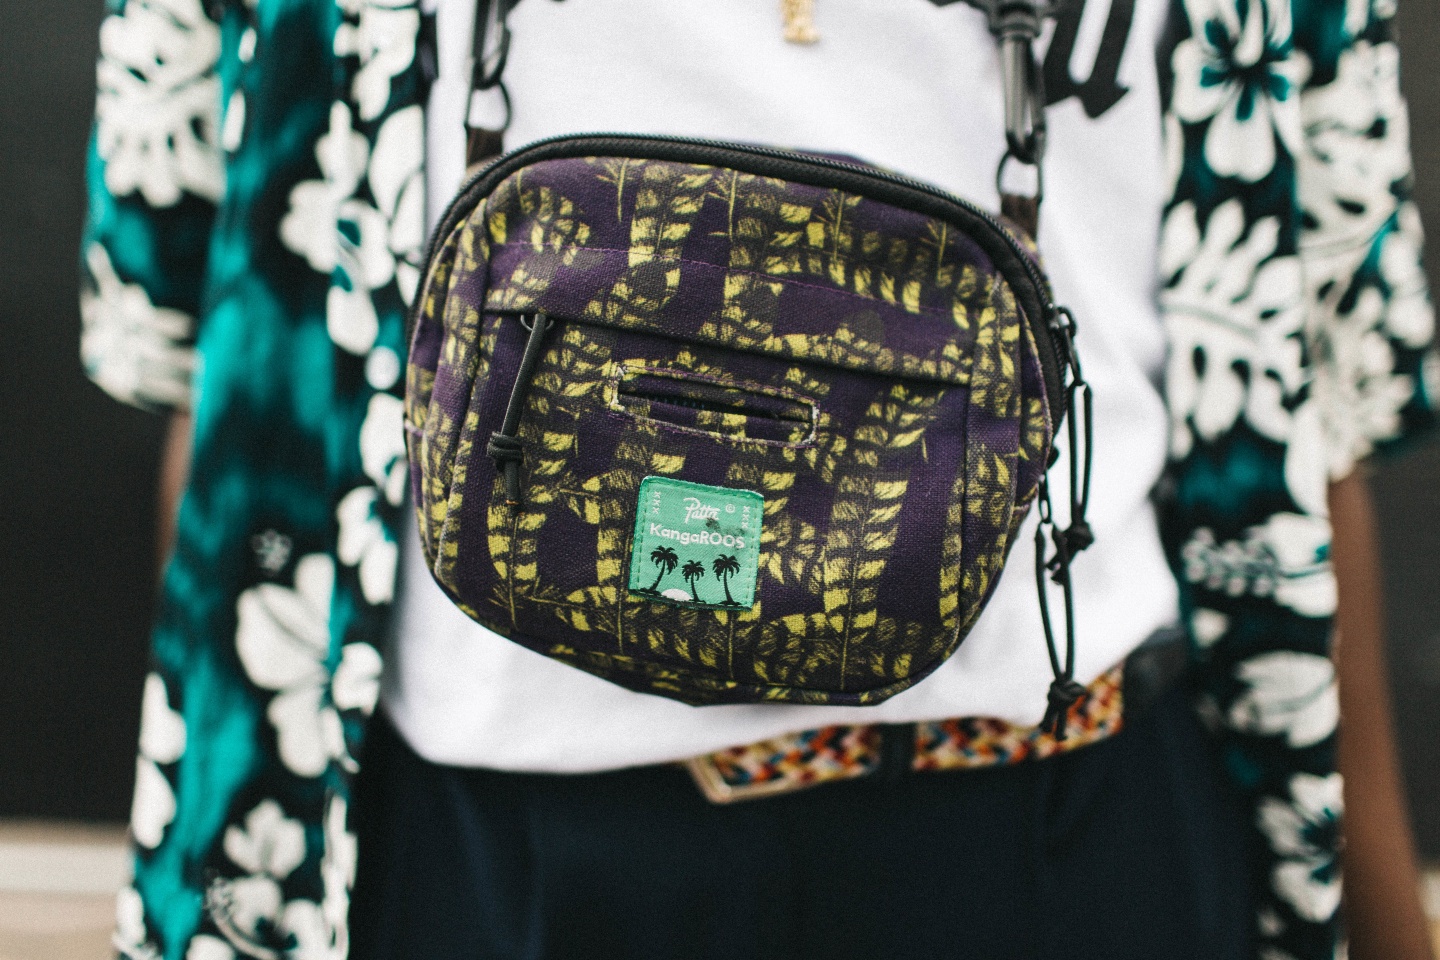 16 Reasons You Need To Go Buy A Fanny Pack Right Now